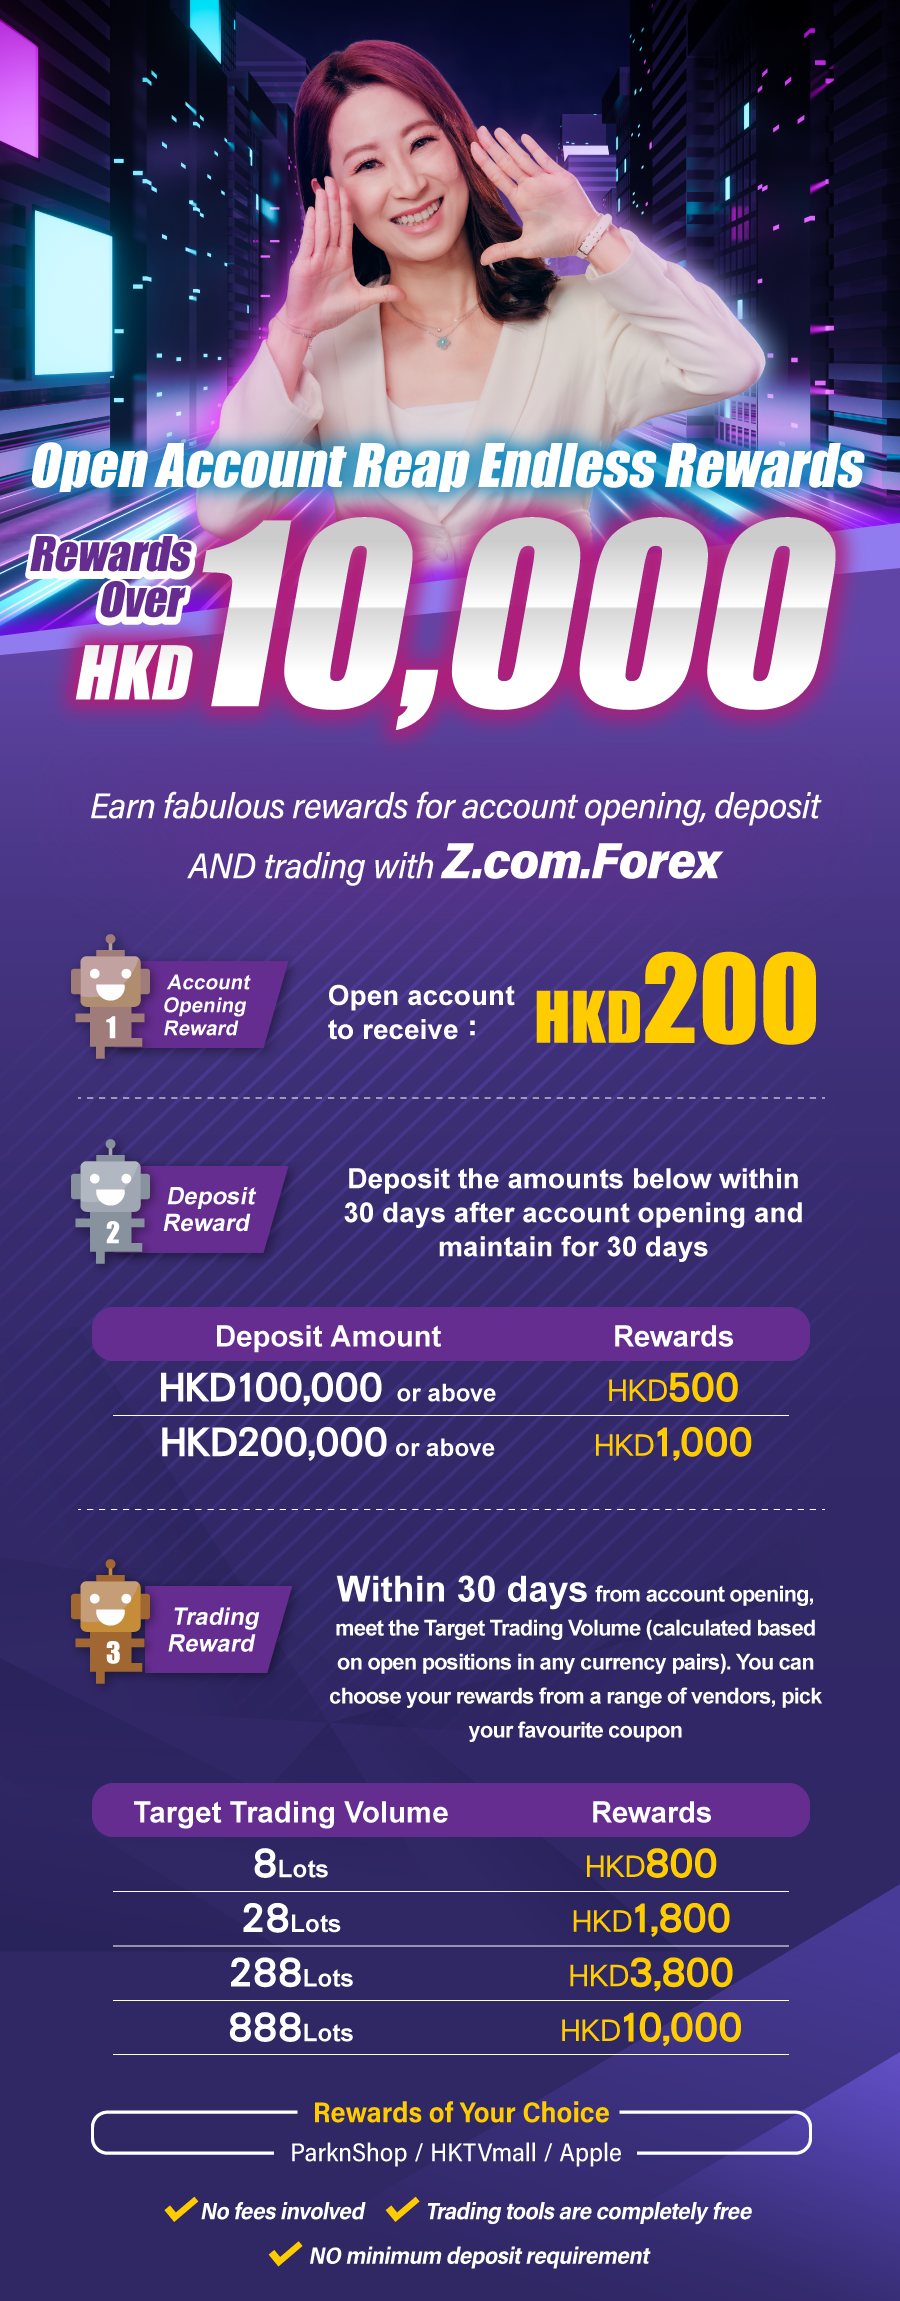 Open Account and Reap Over HKD10,000 Rewards！